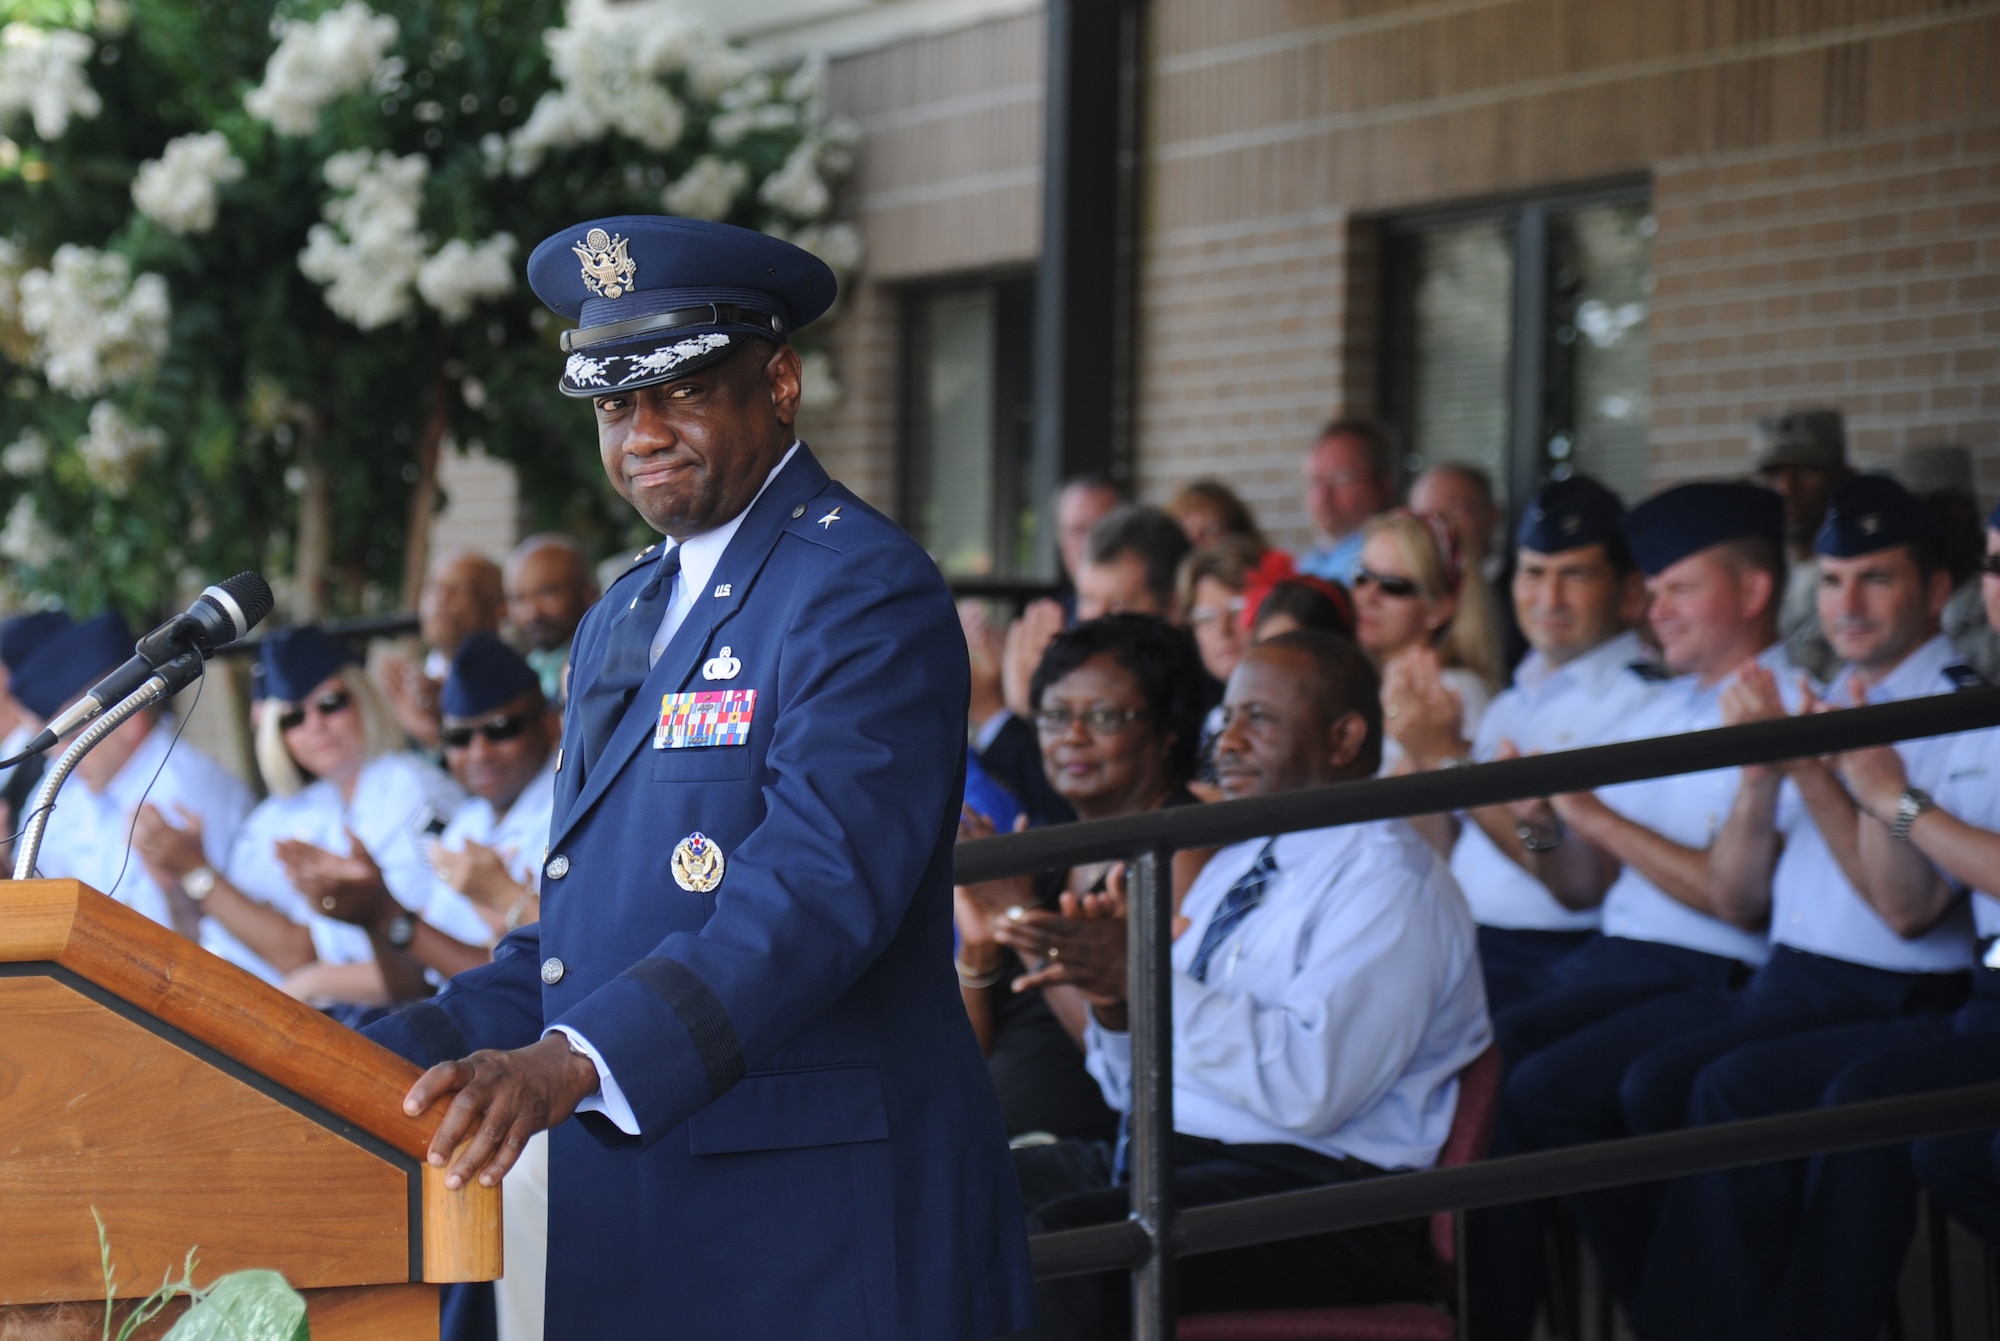 Brig. Gen. Mark Brown, incoming 2nd Air Force commander, prepares to deliver remarks during the 2nd Air Force change of command ceremony July 3, 2014, at Keesler Air Force Base, Miss.  Brown was previously the Financial Management director, Headquarters Air Force Material Command at Wright-Patterson Air Force Base, Ohio. He replaces Maj. Gen. Leonard Patrick, who's headed to Randolph Air Force Base, Texas, where he will become the AETC vice commander.  (U.S. Air Force photo by Kemberly Groue)